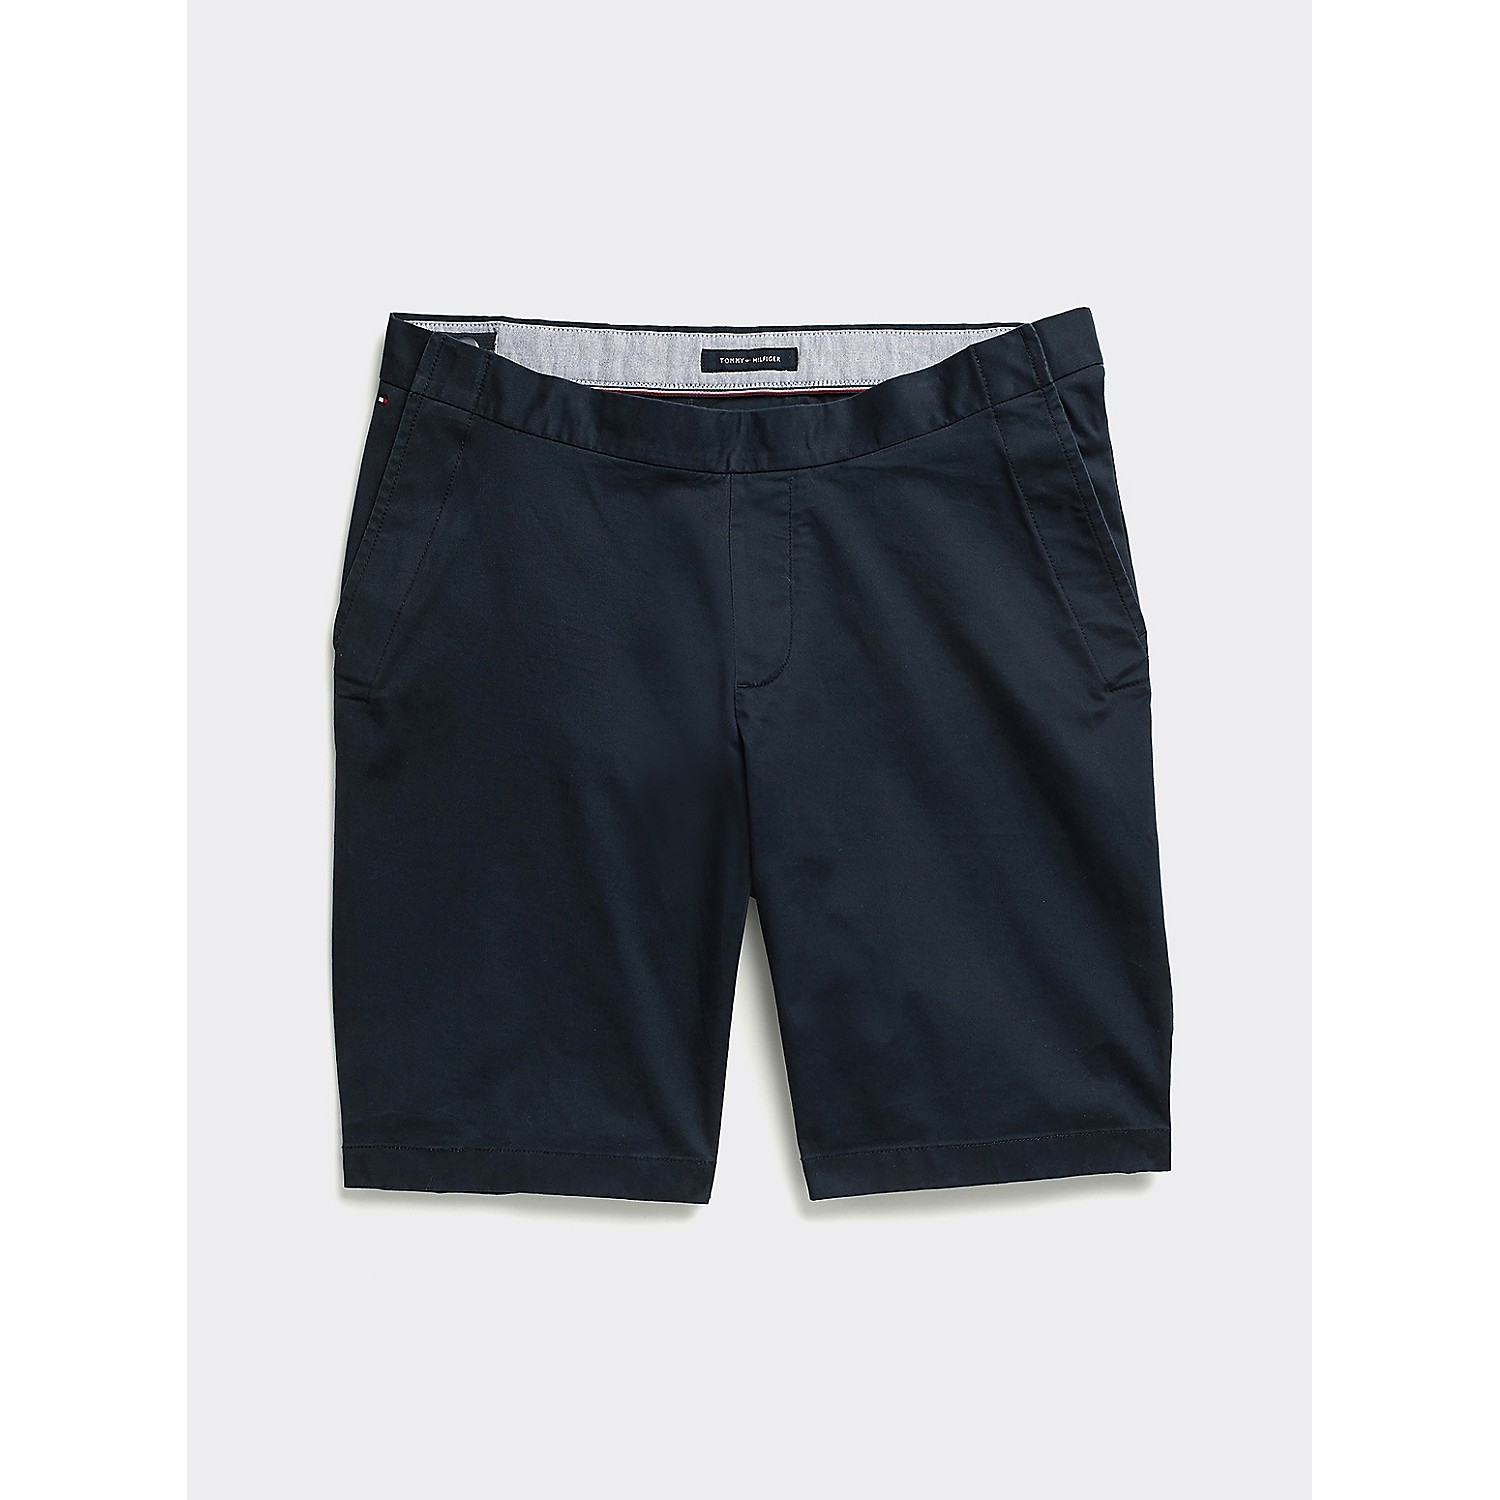 TOMMY HILFIGER Seated Fit Classic Short